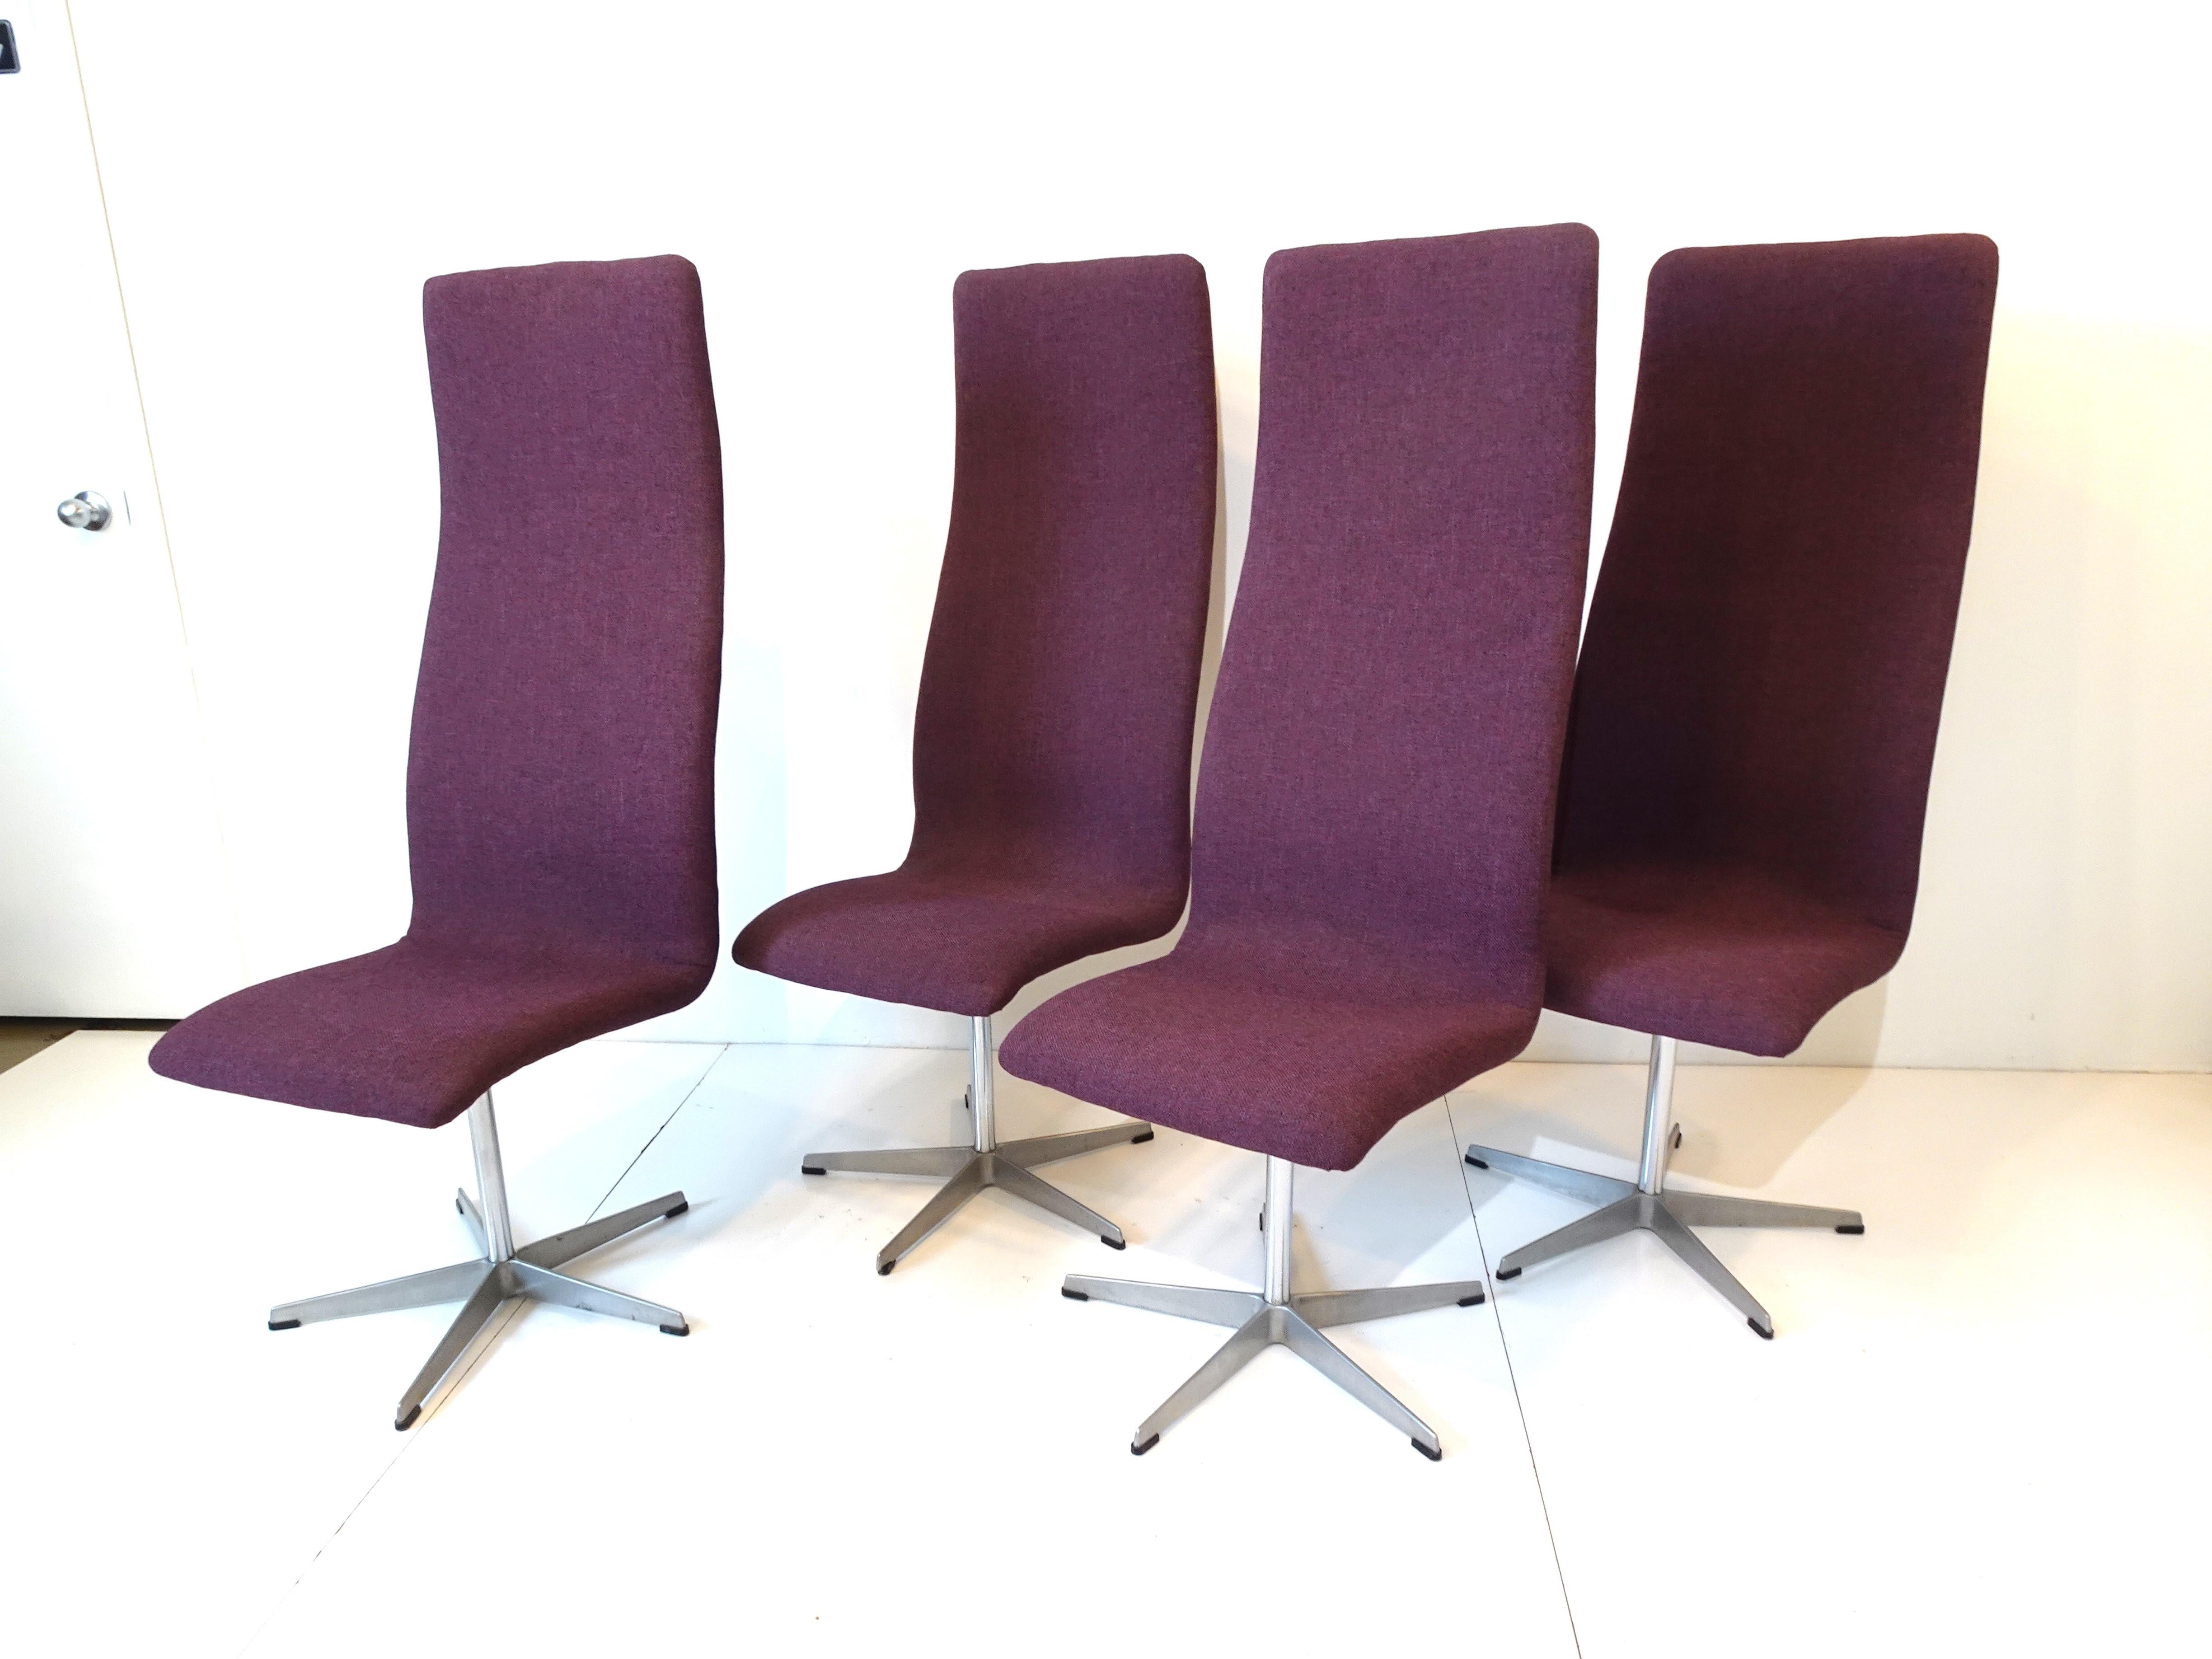 A set of four swiveling upholstered Oxford dining chairs in a tightly woven dark purple contract fabric with chromed shaft and cast aluminum star base having plastic feet to protect your floors . Model number 7403 manufactured by Fritz Hansen made